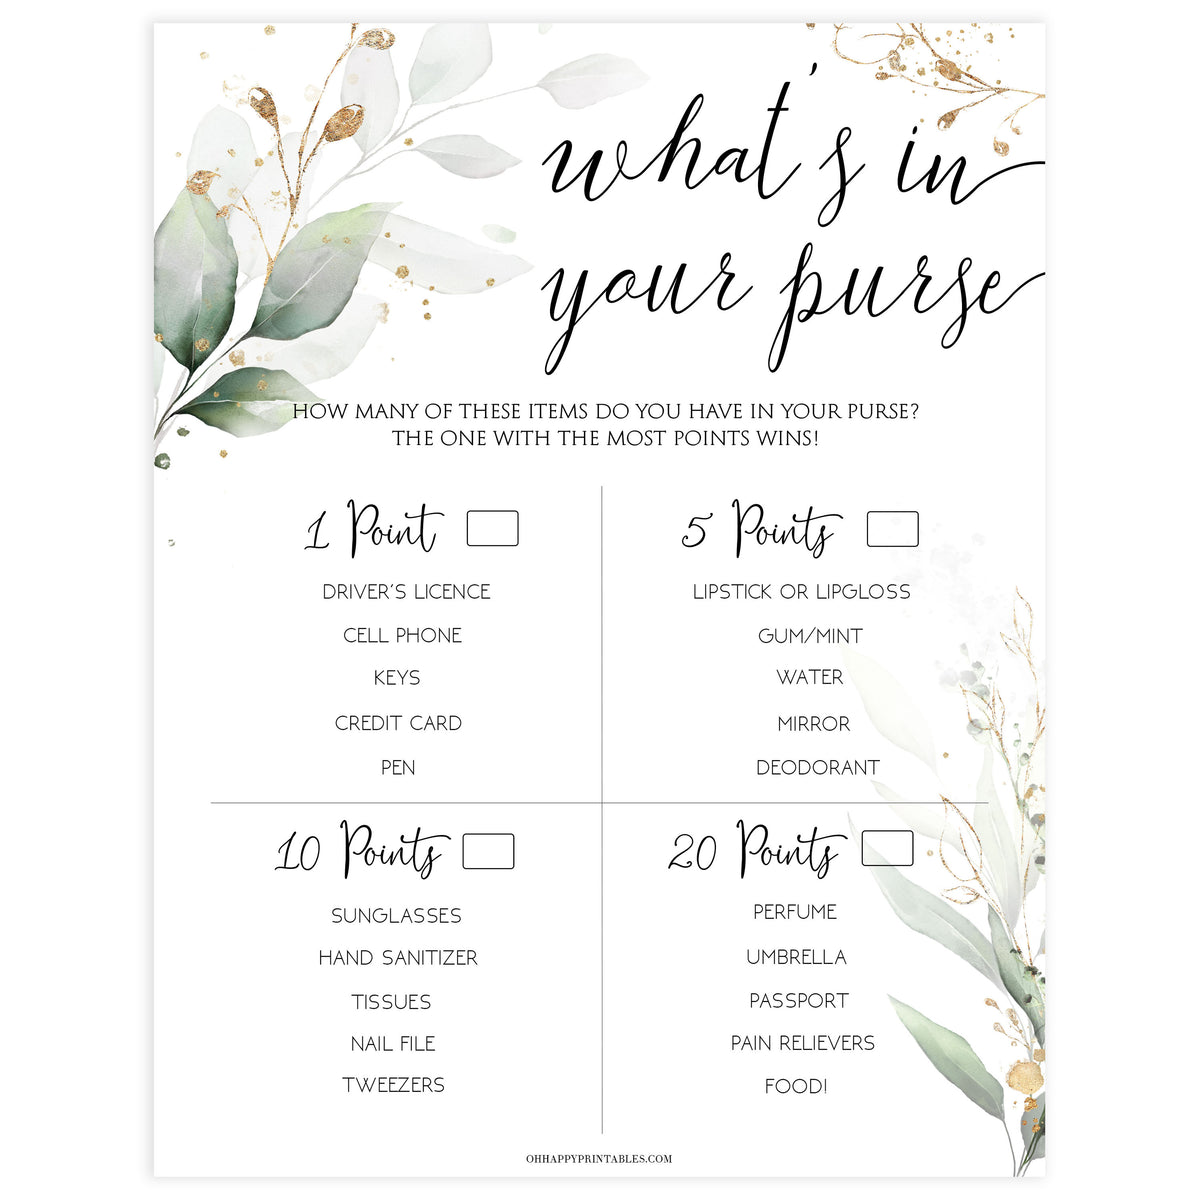 whats in your purse game, Printable bridal shower games, greenery bridal shower, gold leaf bridal shower games, fun bridal shower games, bridal shower game ideas, greenery bridal shower